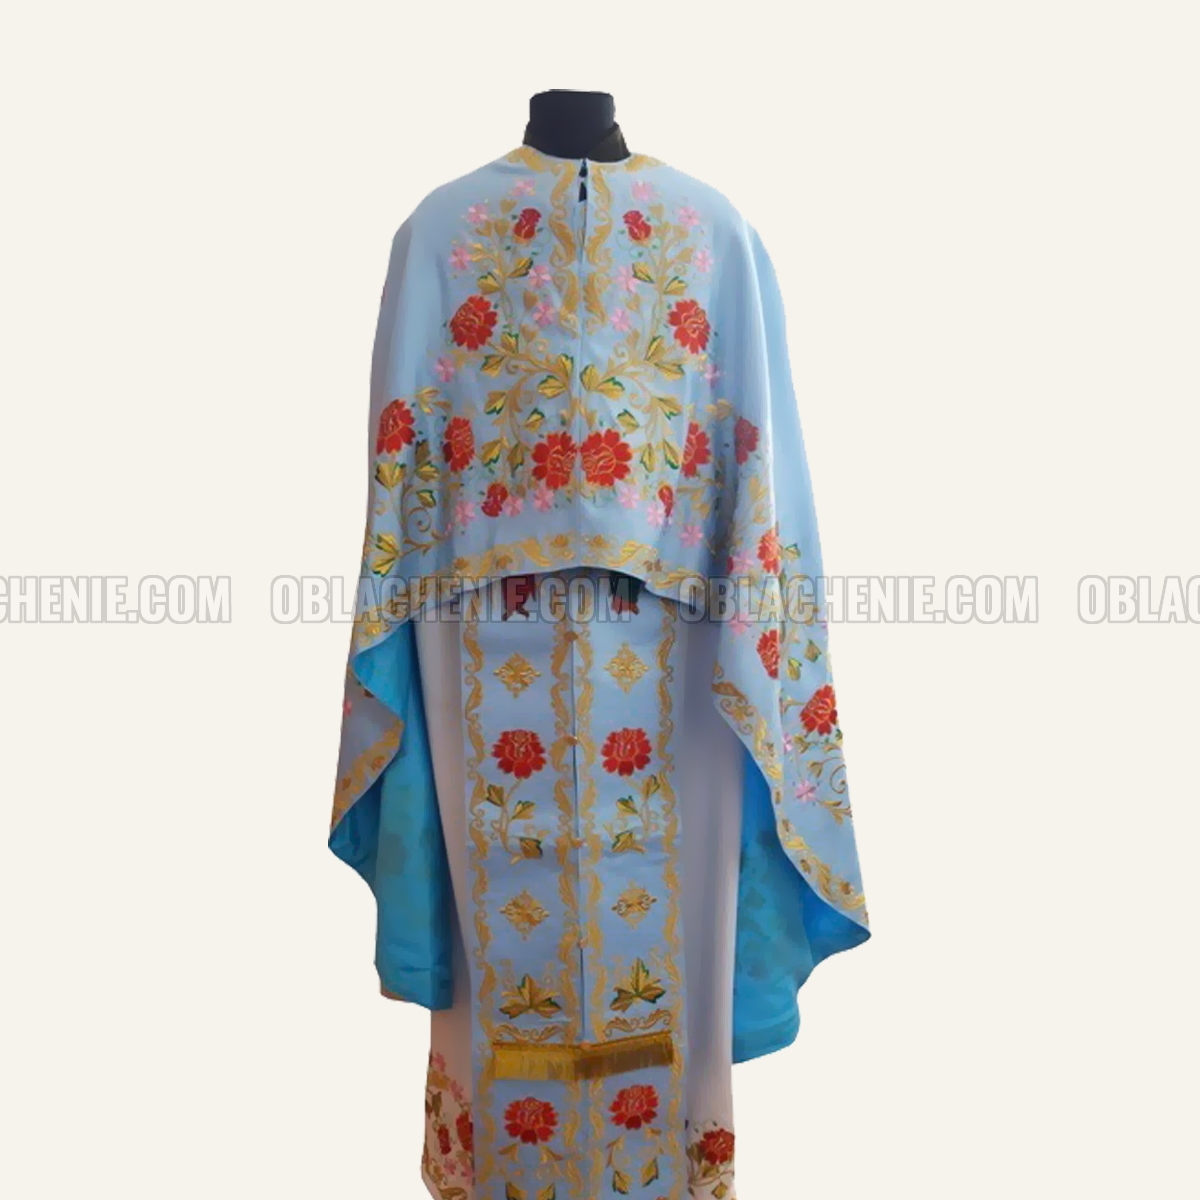 Embroidered priest's vestments 10230